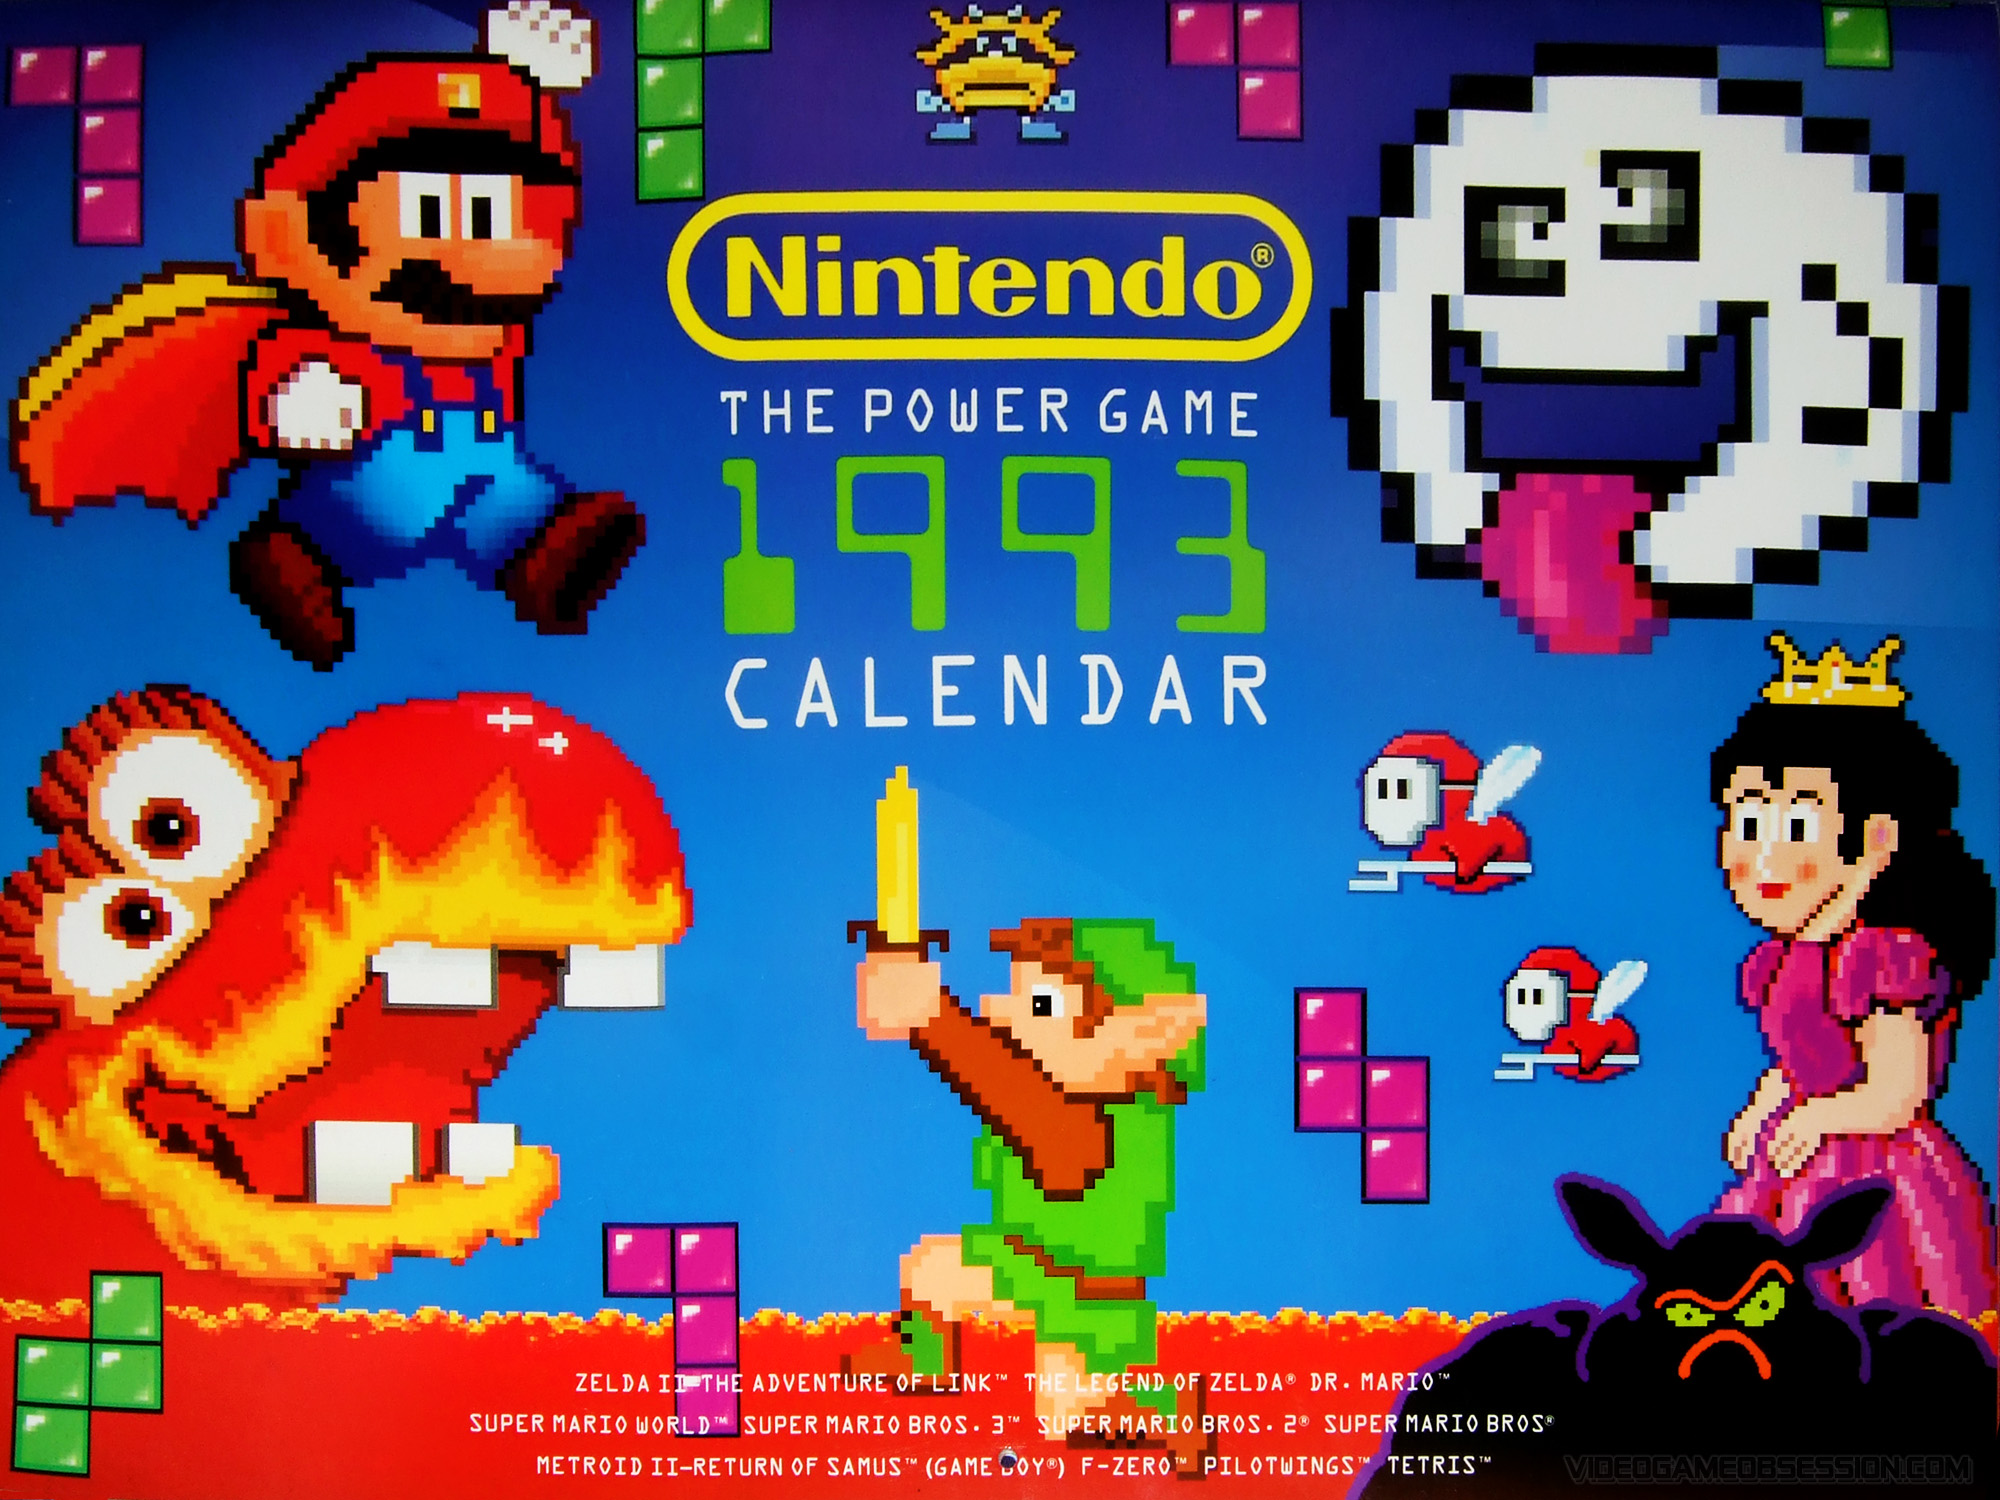 Nintendo The Power Game Calendar 1993 Video Game Obsession (c) 1996